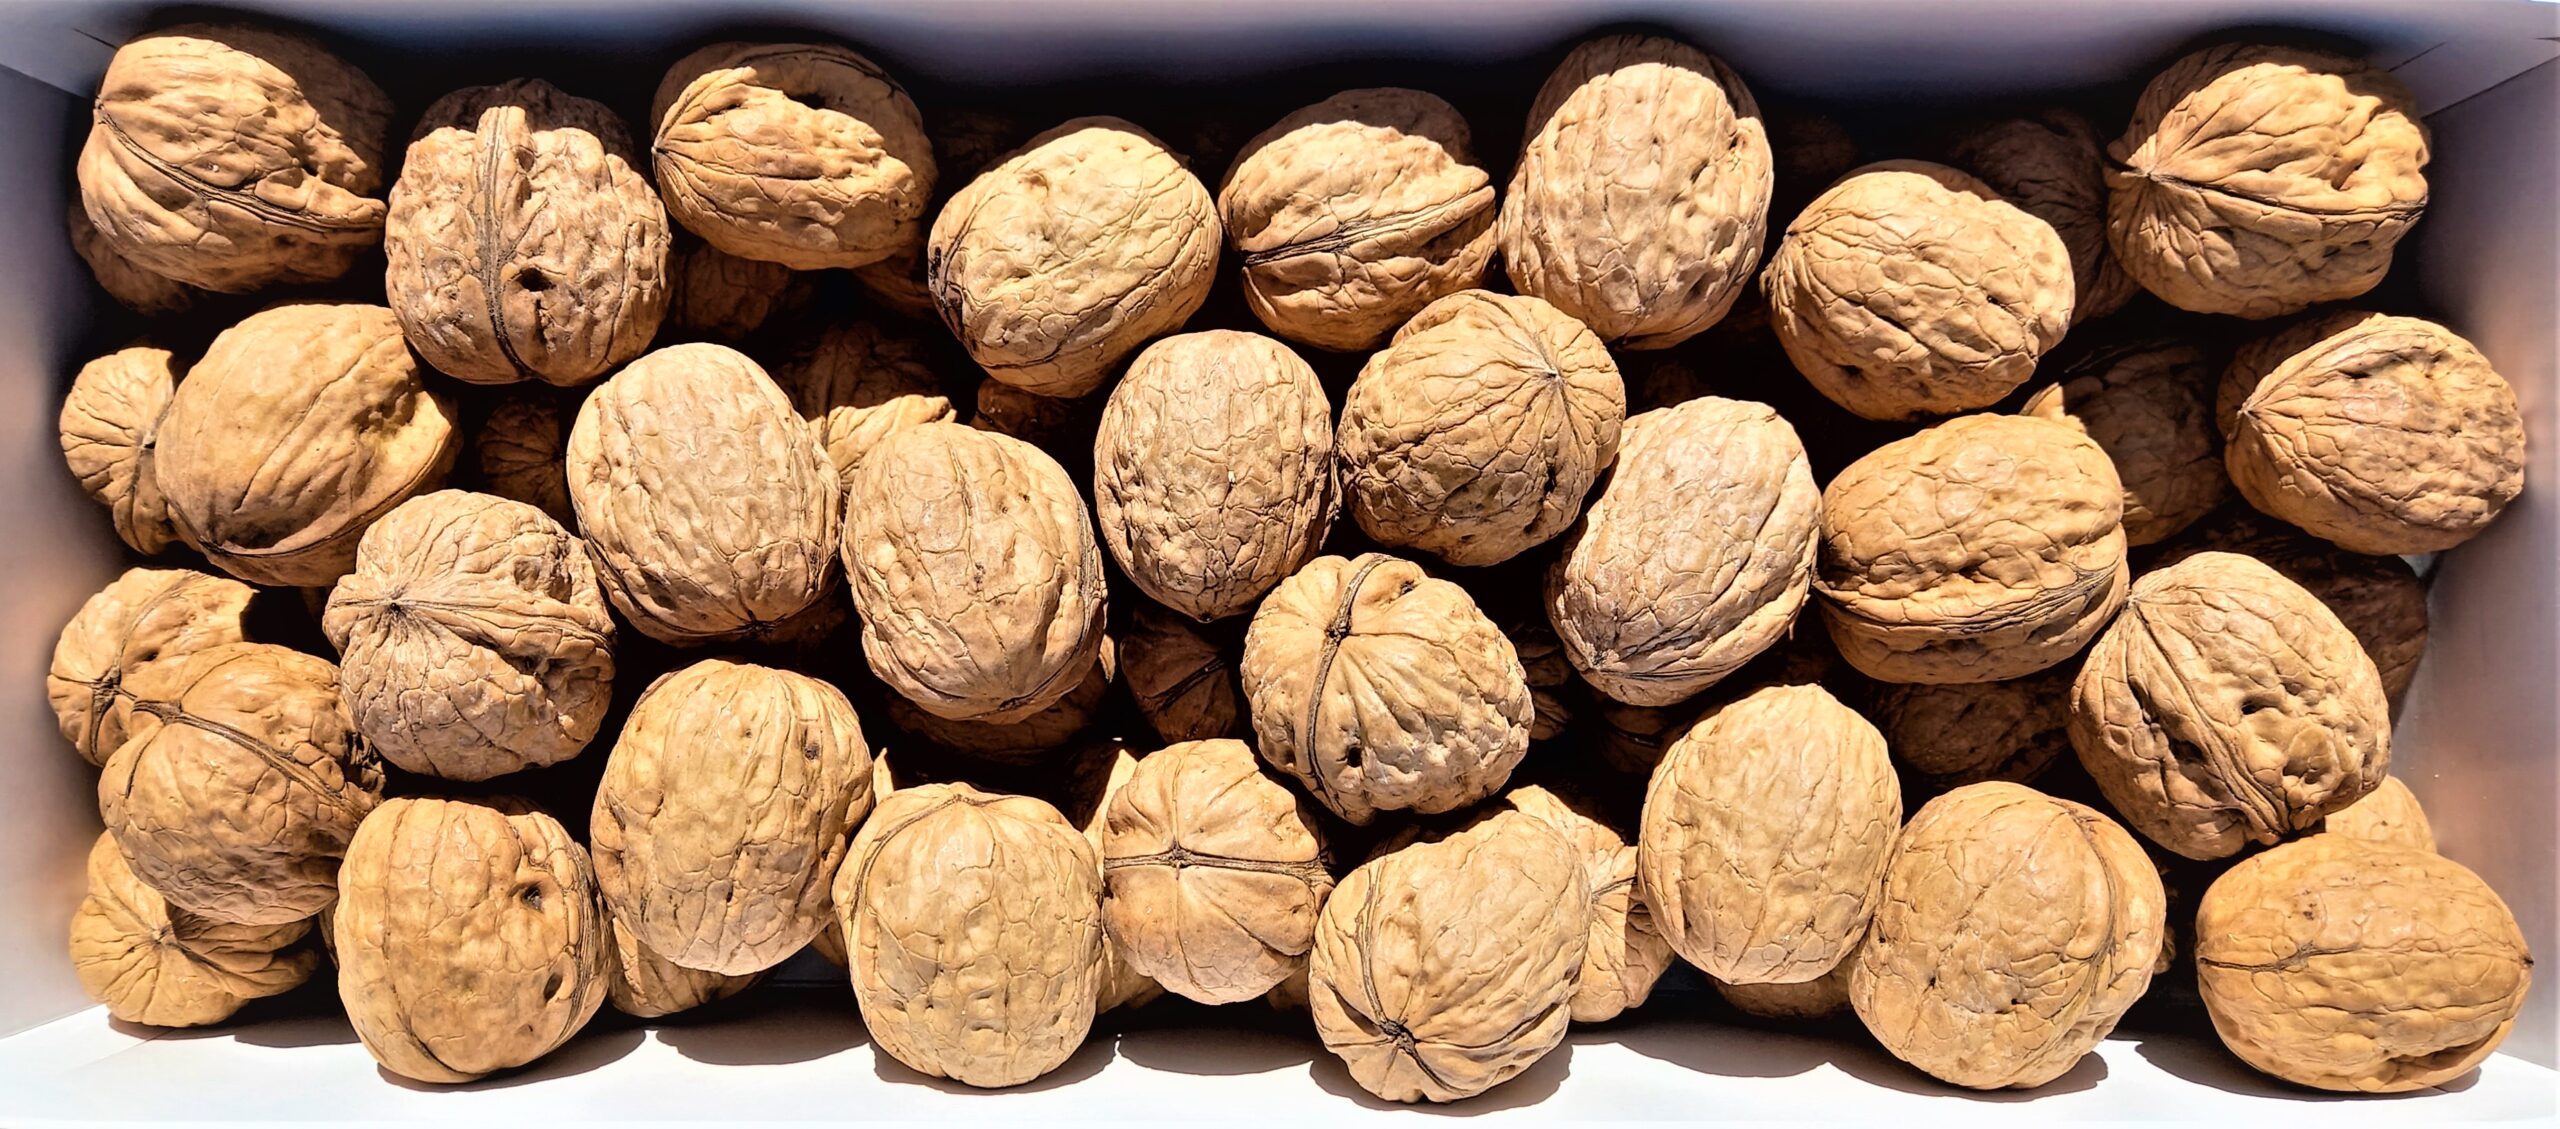 The knowledge of walnuts